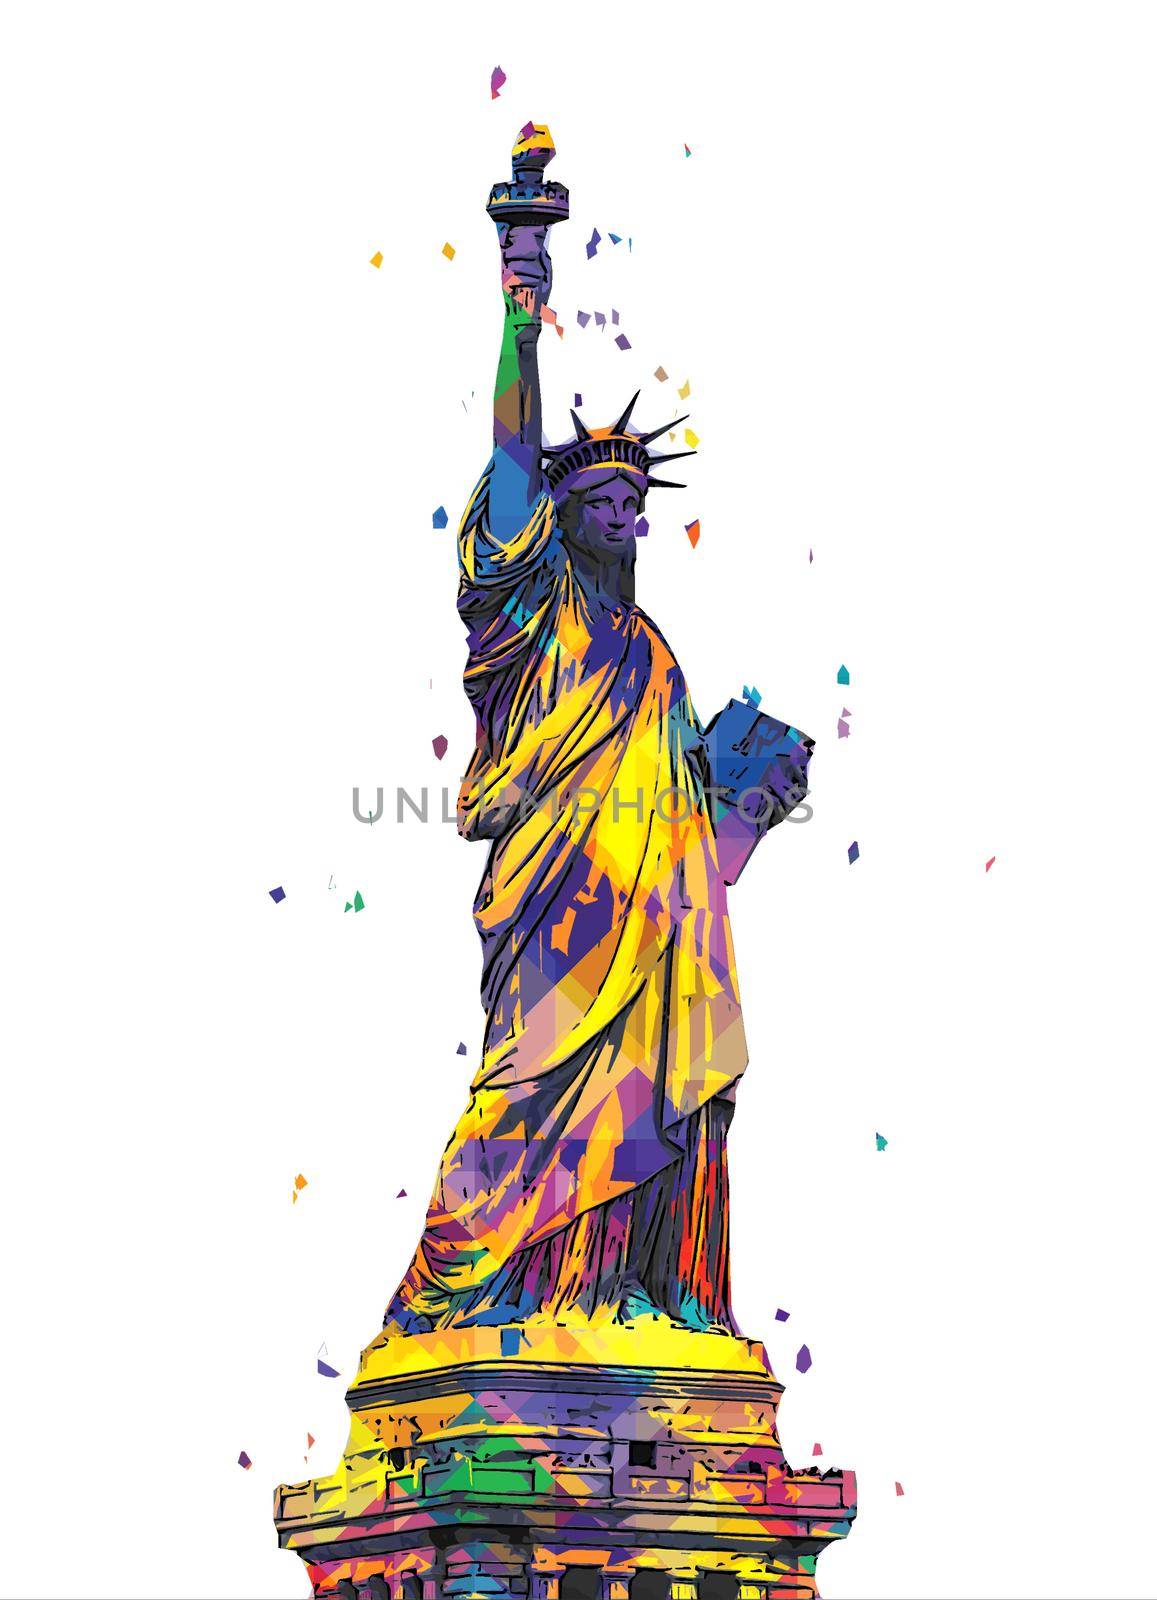 The Statue of Liberty isolated on white background, digital pop art design by Mariakray